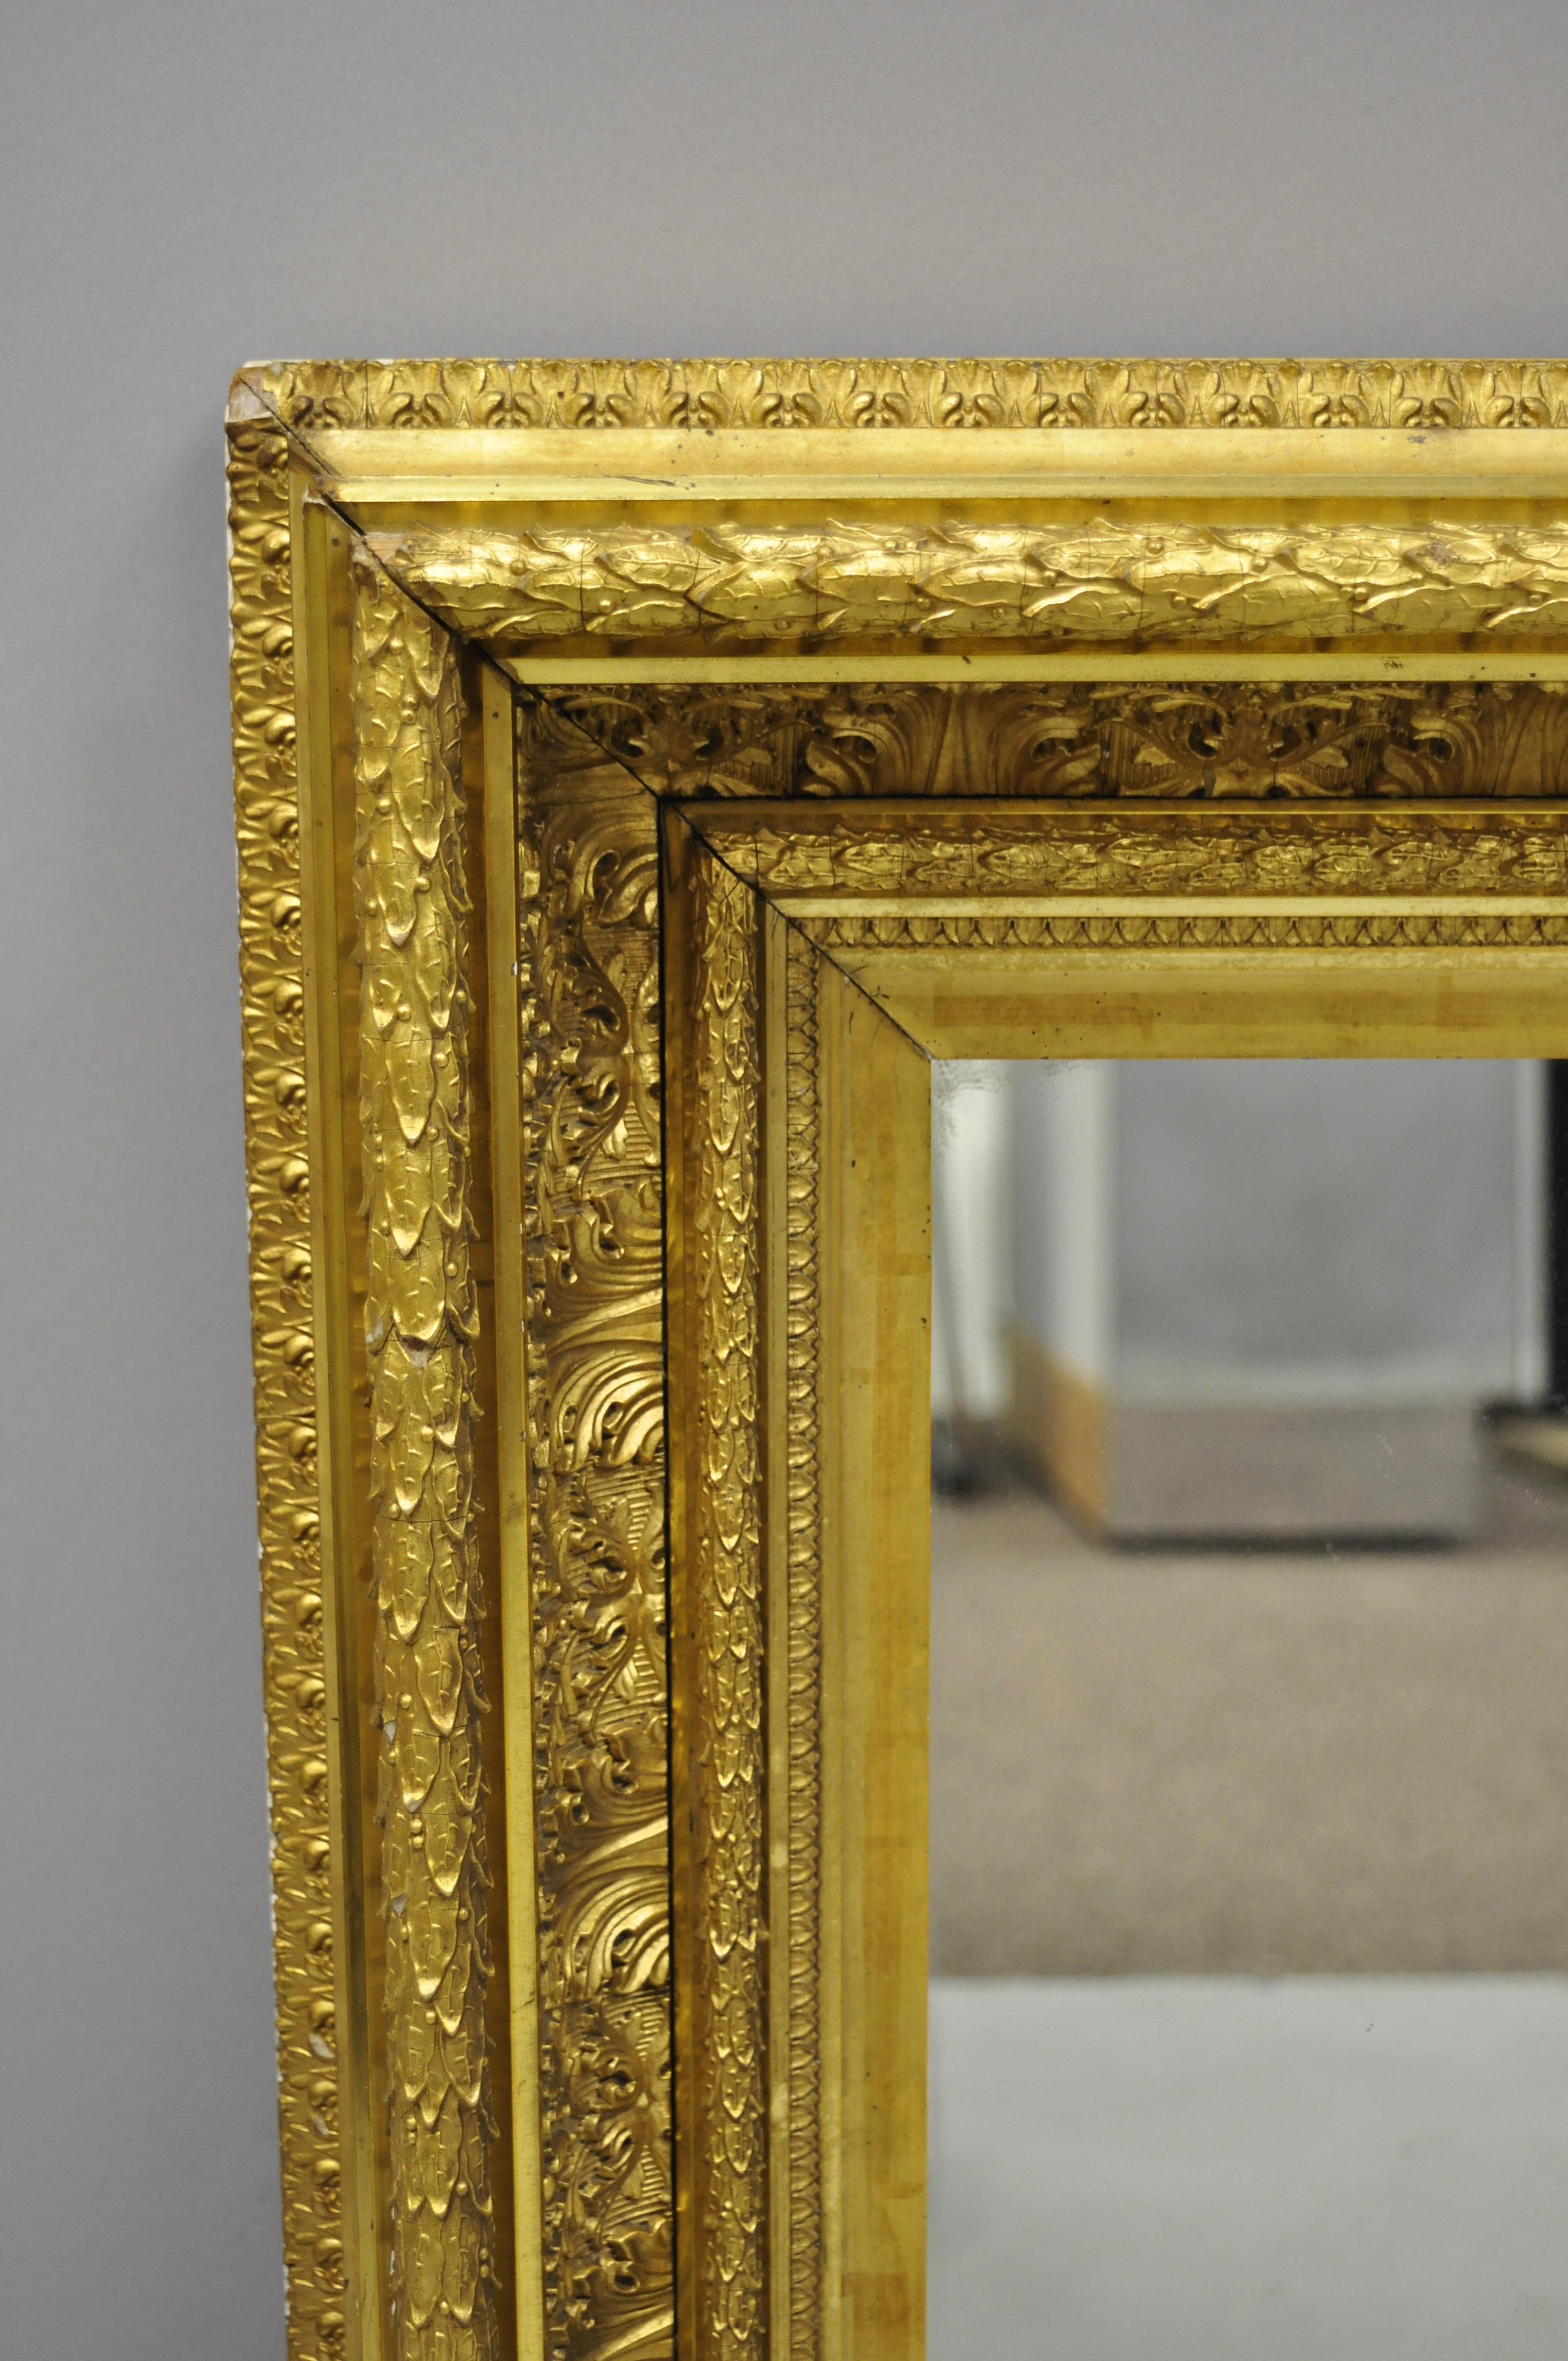 19th century gilt & gesso wood frame wall mirror with foliate design. Item features ornate gold gilt gesso foliate, wooden frame, central mirror, very nice antique item, circa 19th century. Measurements: 30